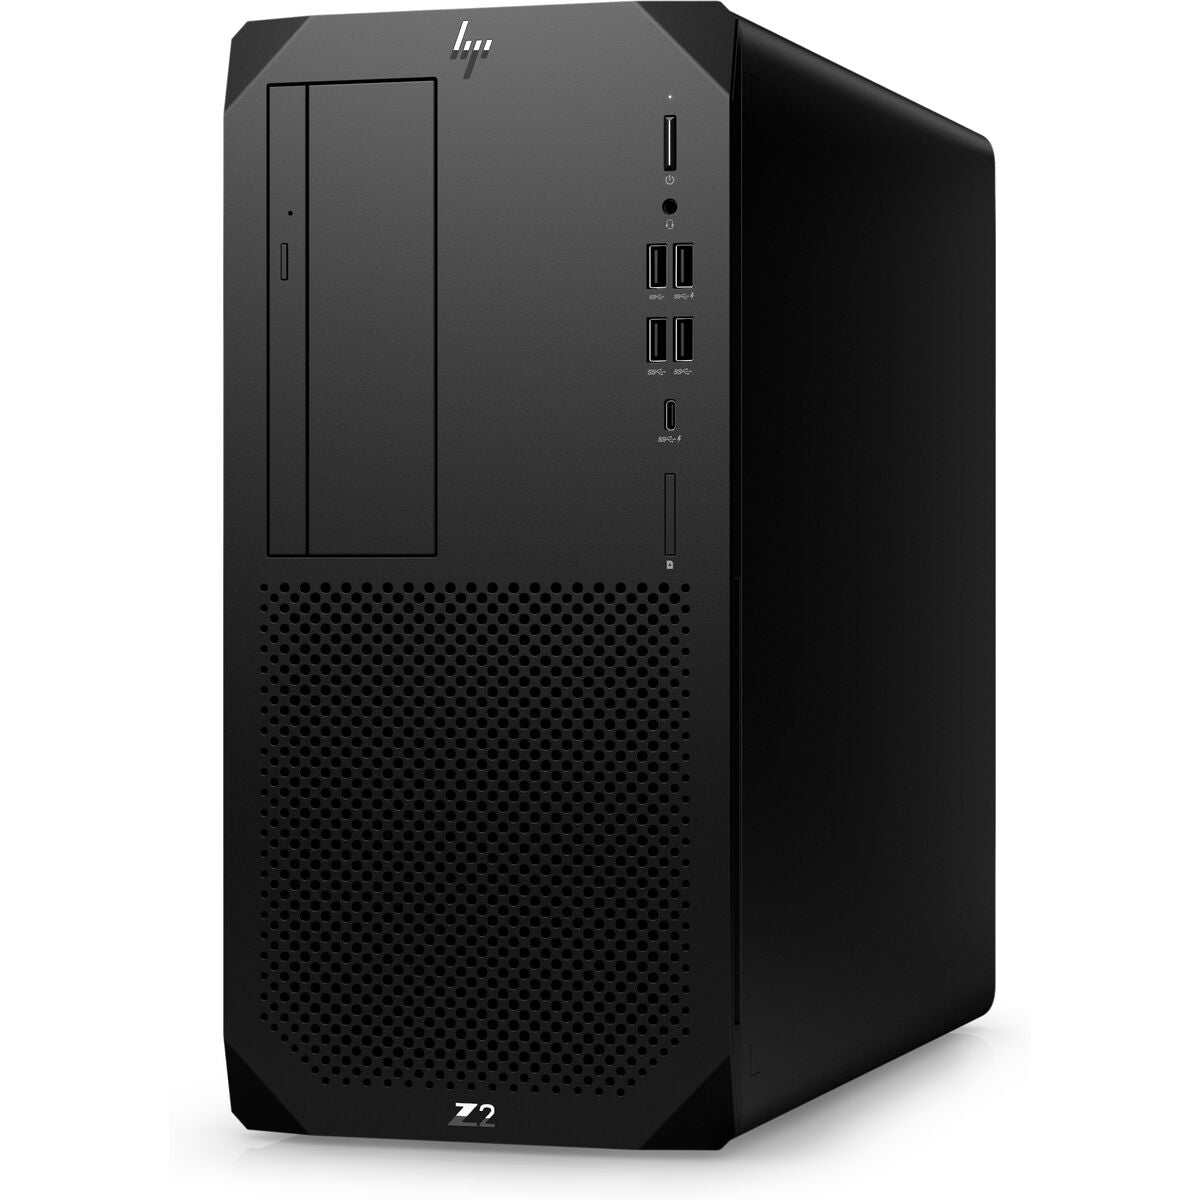 Desktop PC HP Z2 G9 Intel Core i7-14700 32 GB RAM 1 TB SSD, HP, Computing, Desktops, desktop-pc-hp-z2-g9-intel-core-i7-14700-32-gb-ram-1-tb-ssd-1, Brand_HP, category-reference-2609, category-reference-2791, category-reference-2792, category-reference-t-19685, category-reference-t-19903, category-reference-t-21381, computers / components, Condition_NEW, office, Price_+ 1000, Teleworking, RiotNook